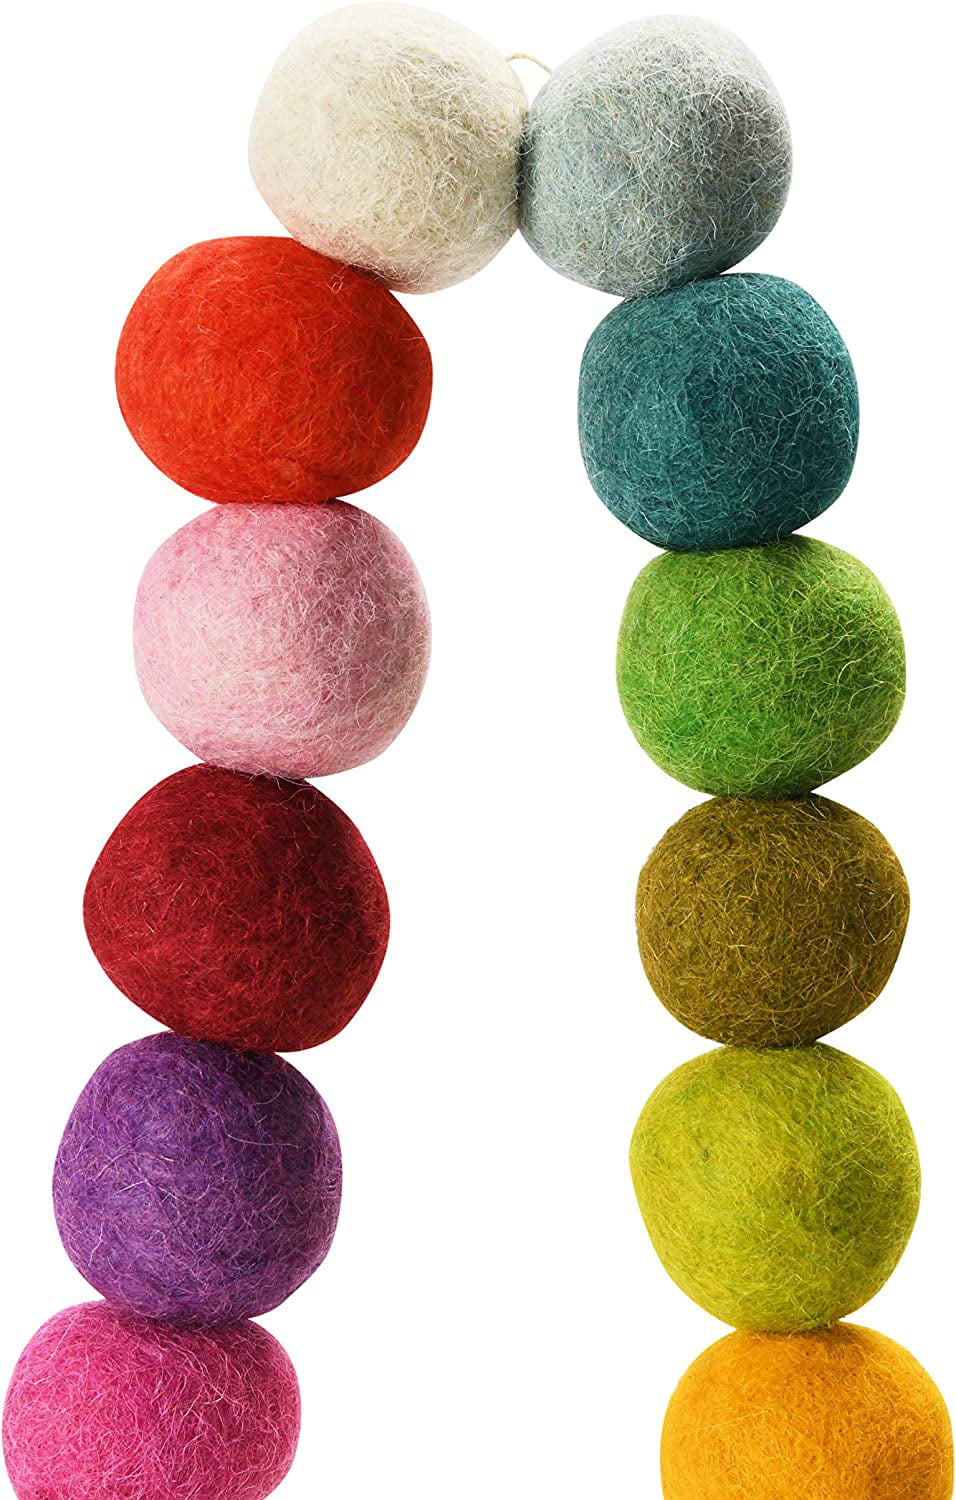 Luckforest Natural Wool Felt Balls Pom Poms, 30 Pcs 15 Colors for Crafts,  Garland, Felting, Baby Mobile, and Decor 0.8 Inch Nepalese 100% New Zealand